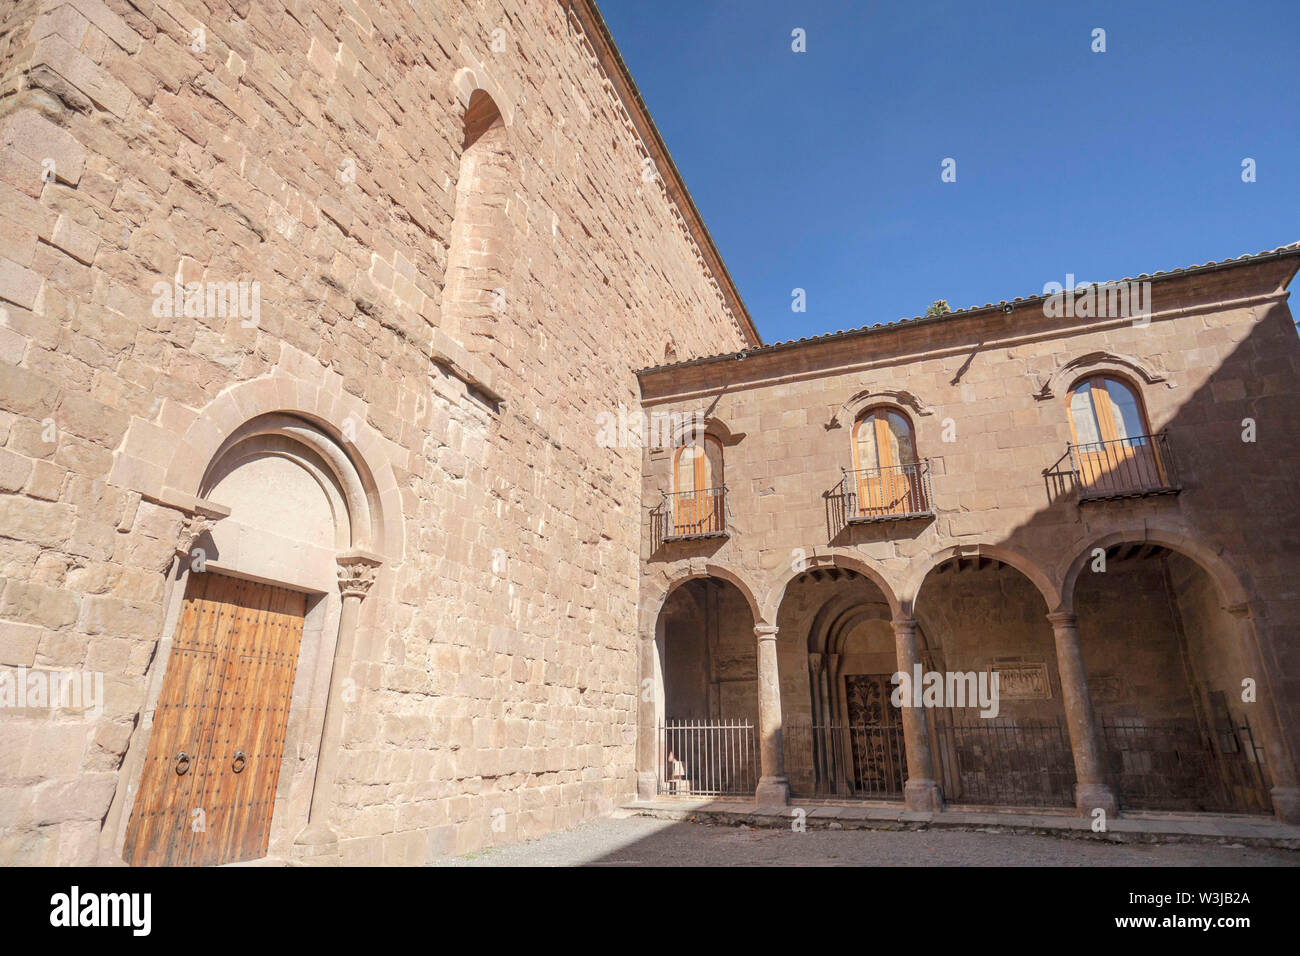 Sant Joan de les Abadesses, Catalonia, Spain. Exterior view of Monastery of Sant Joan, romanesque and gothic style. Stock Photo